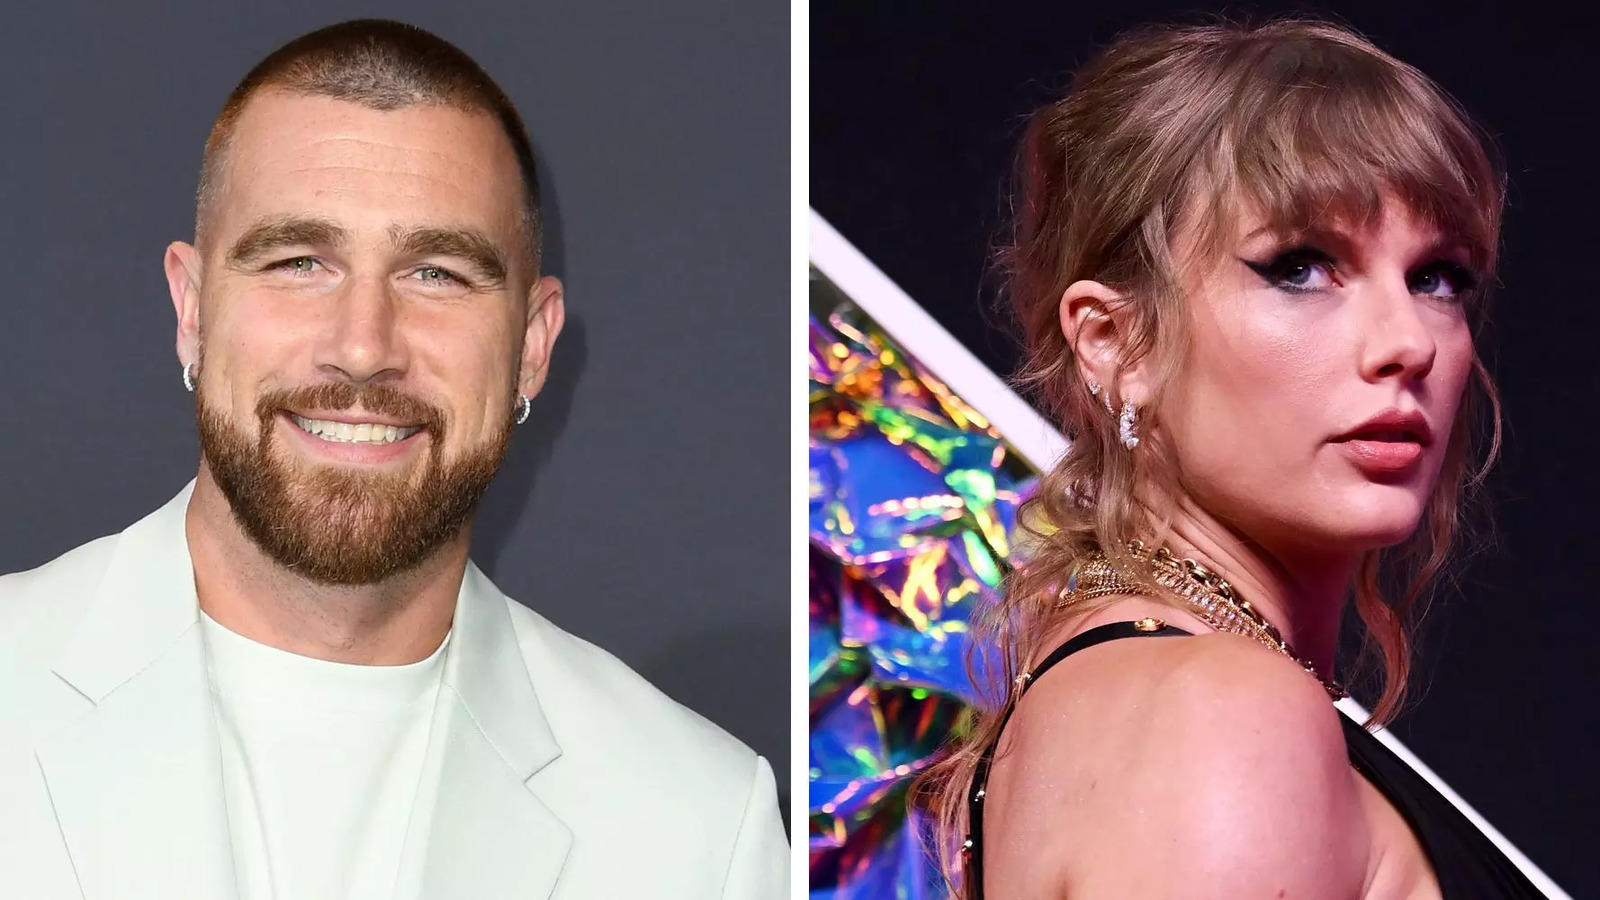 Fans are totally melting after a newly surfaced image reportedly shows Travis Kelce's cellphone charging on a bar, confirming once and for all that the tight end is "Down Bad" for Taylor Swift.